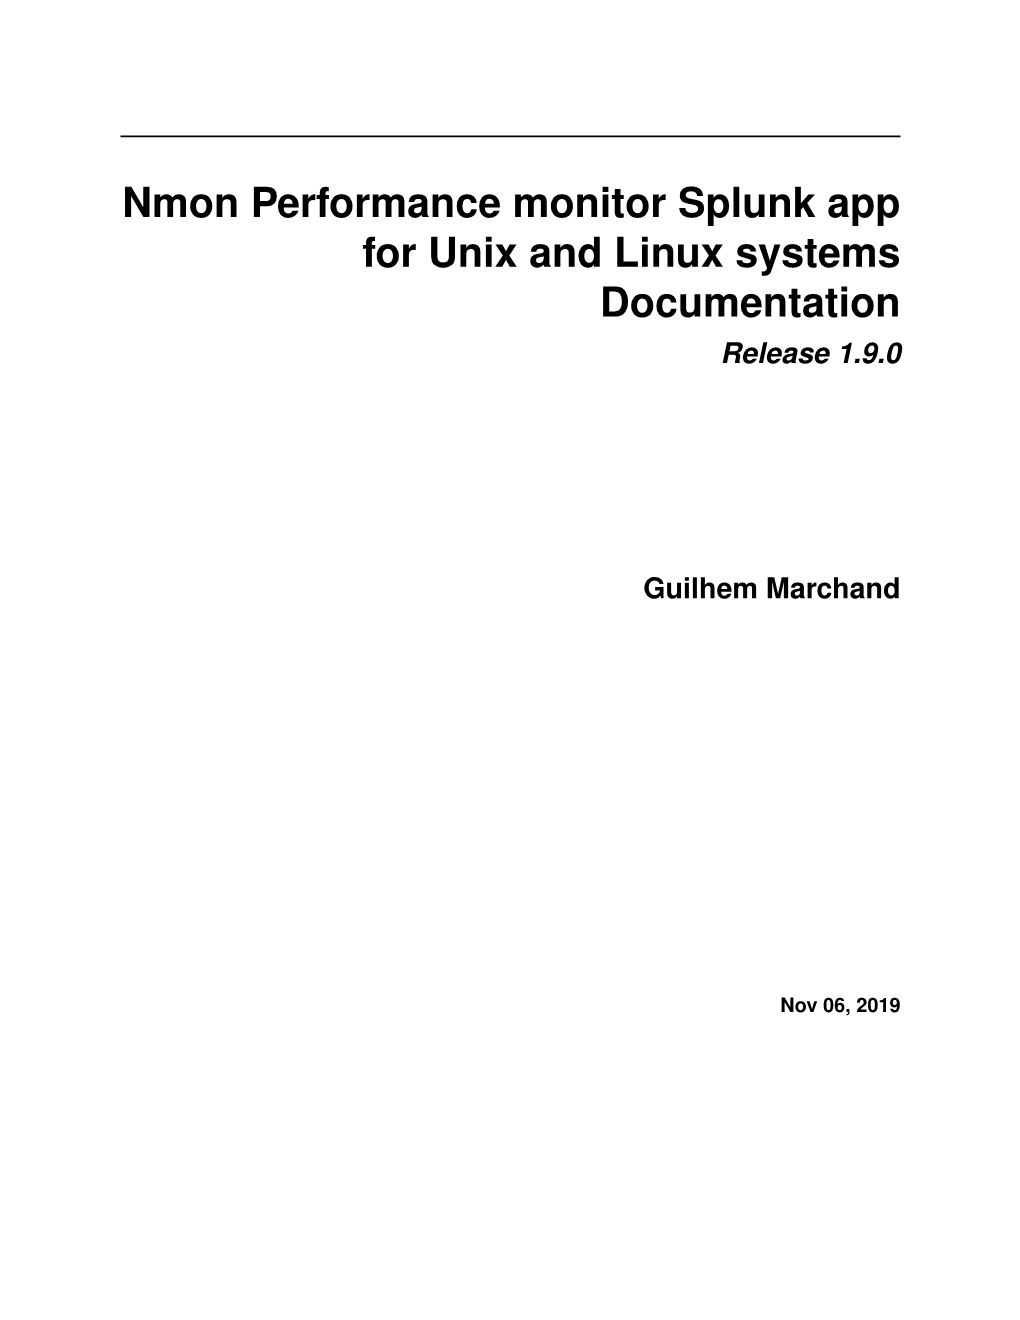 Nmon Performance Monitor Splunk App for Unix and Linux Systems Documentation Release 1.9.0